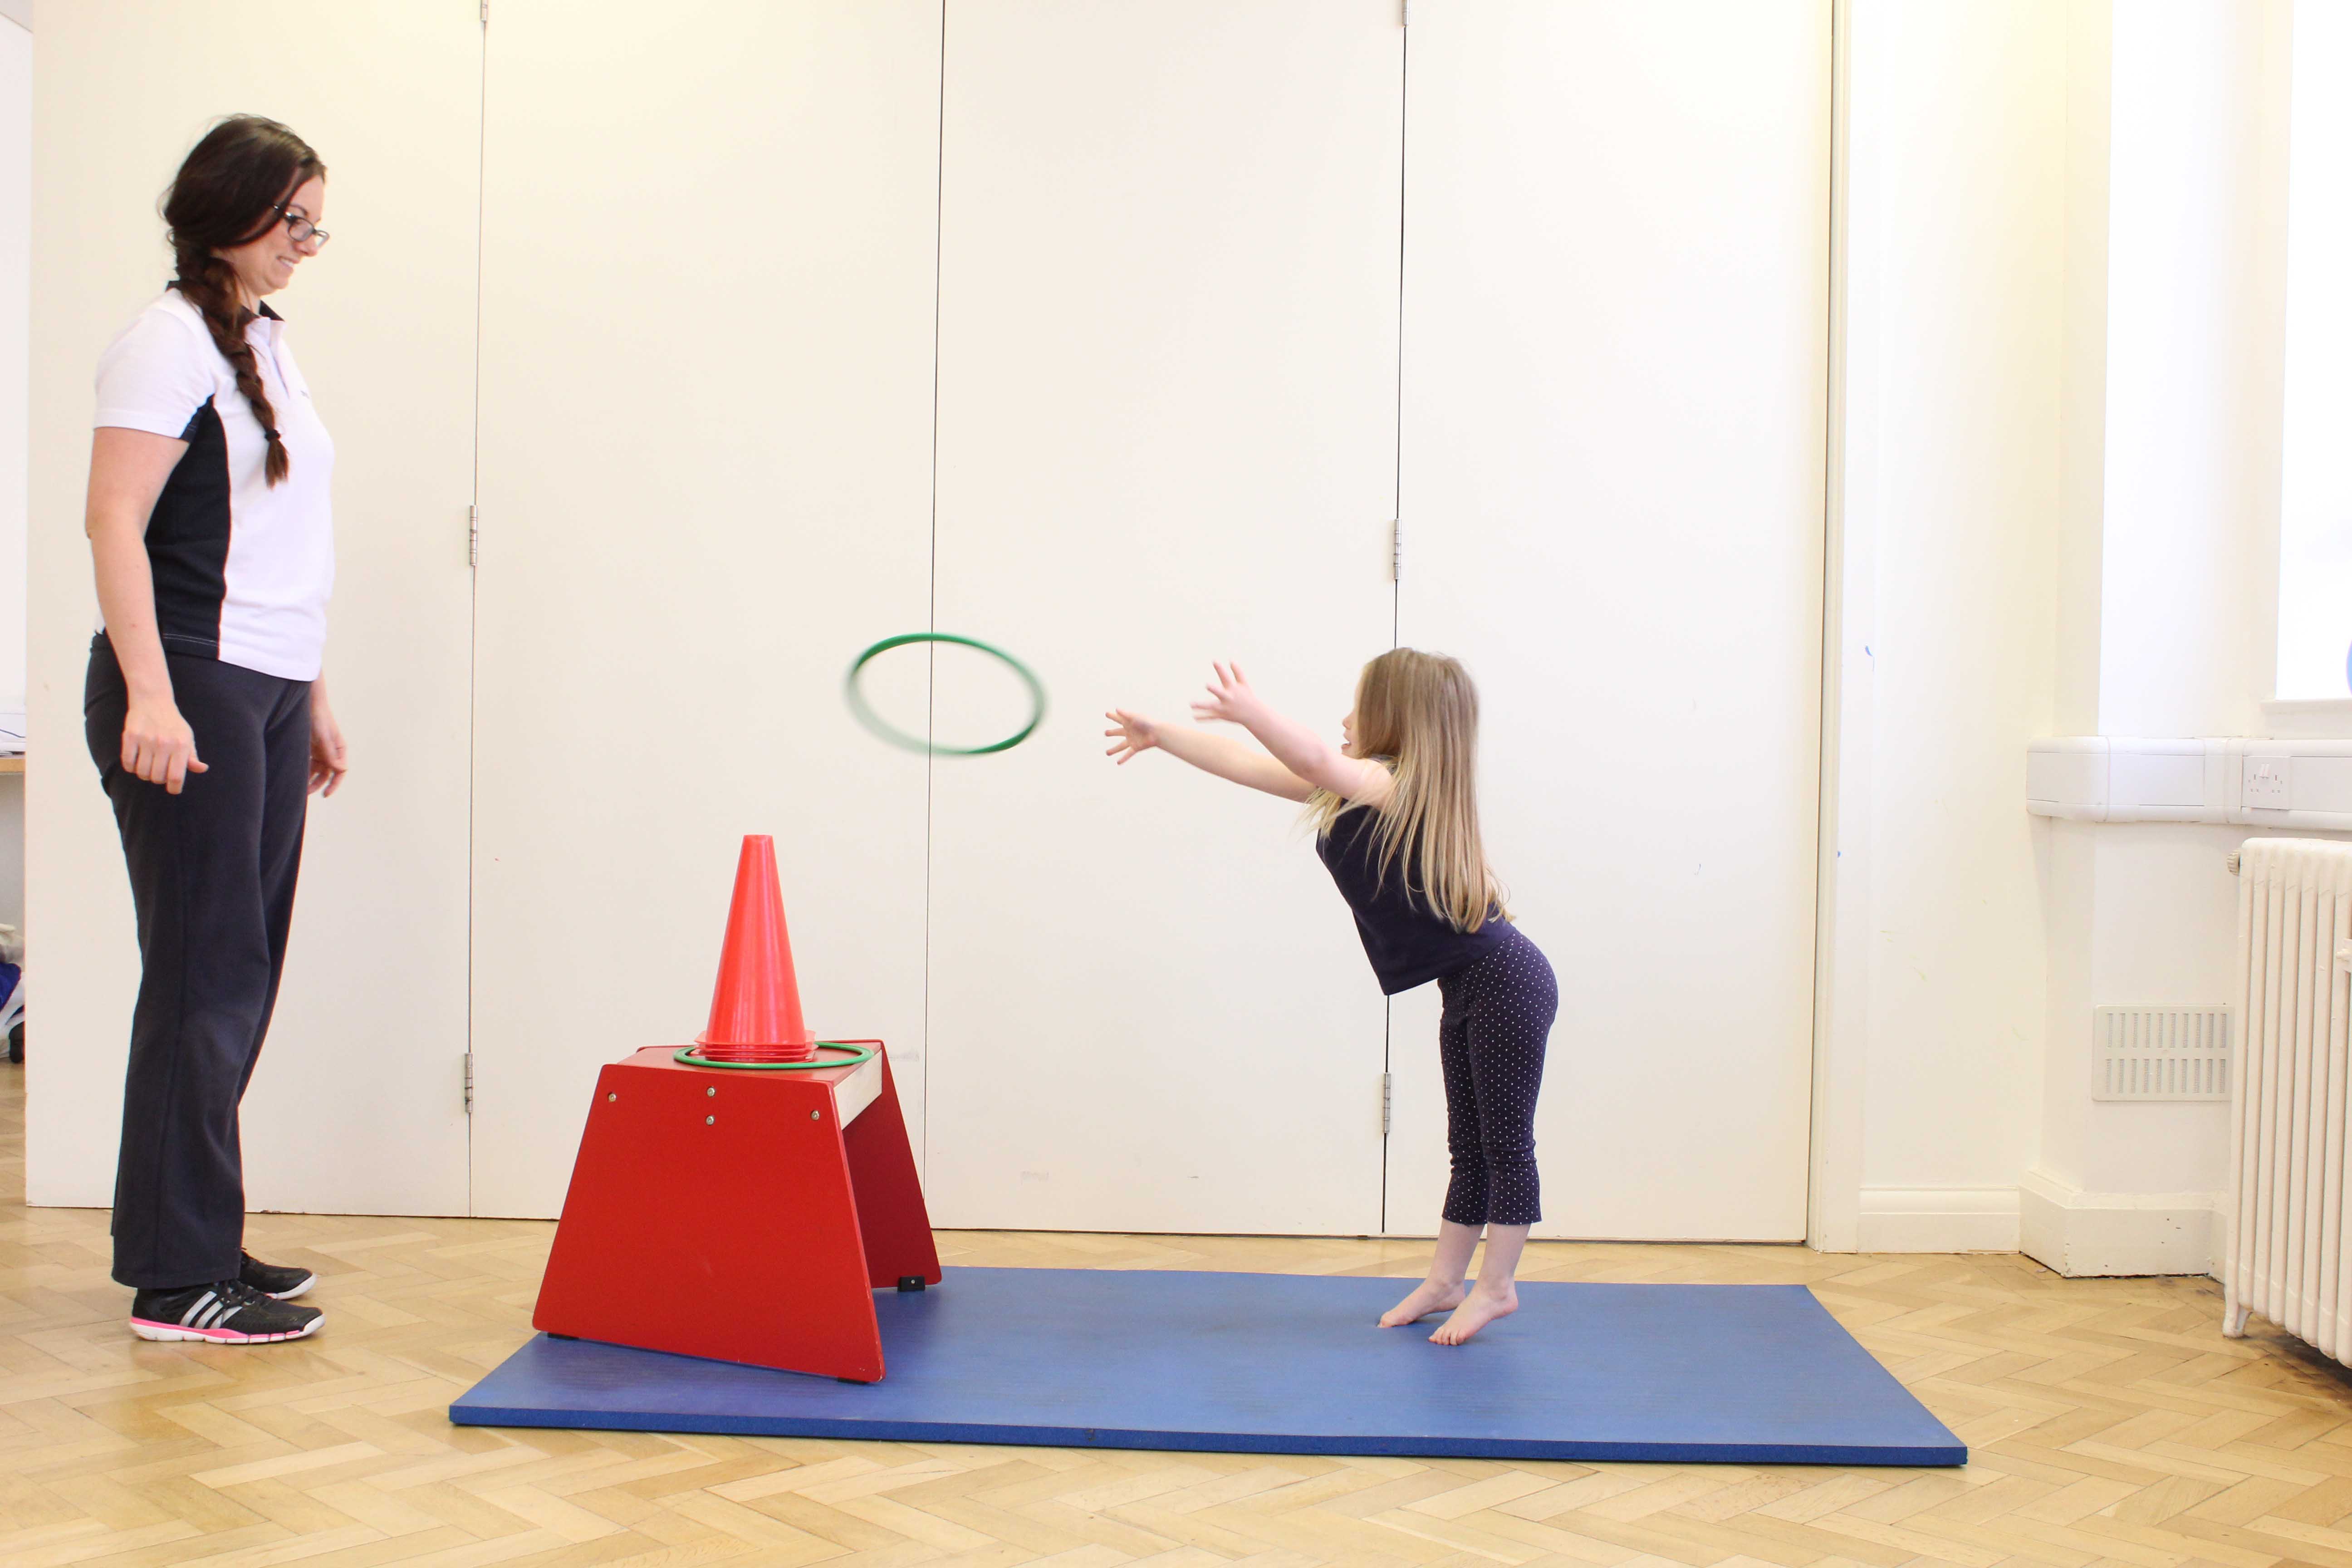 Functional rehabilitation through play activities overseen by a specialist physiotherapist